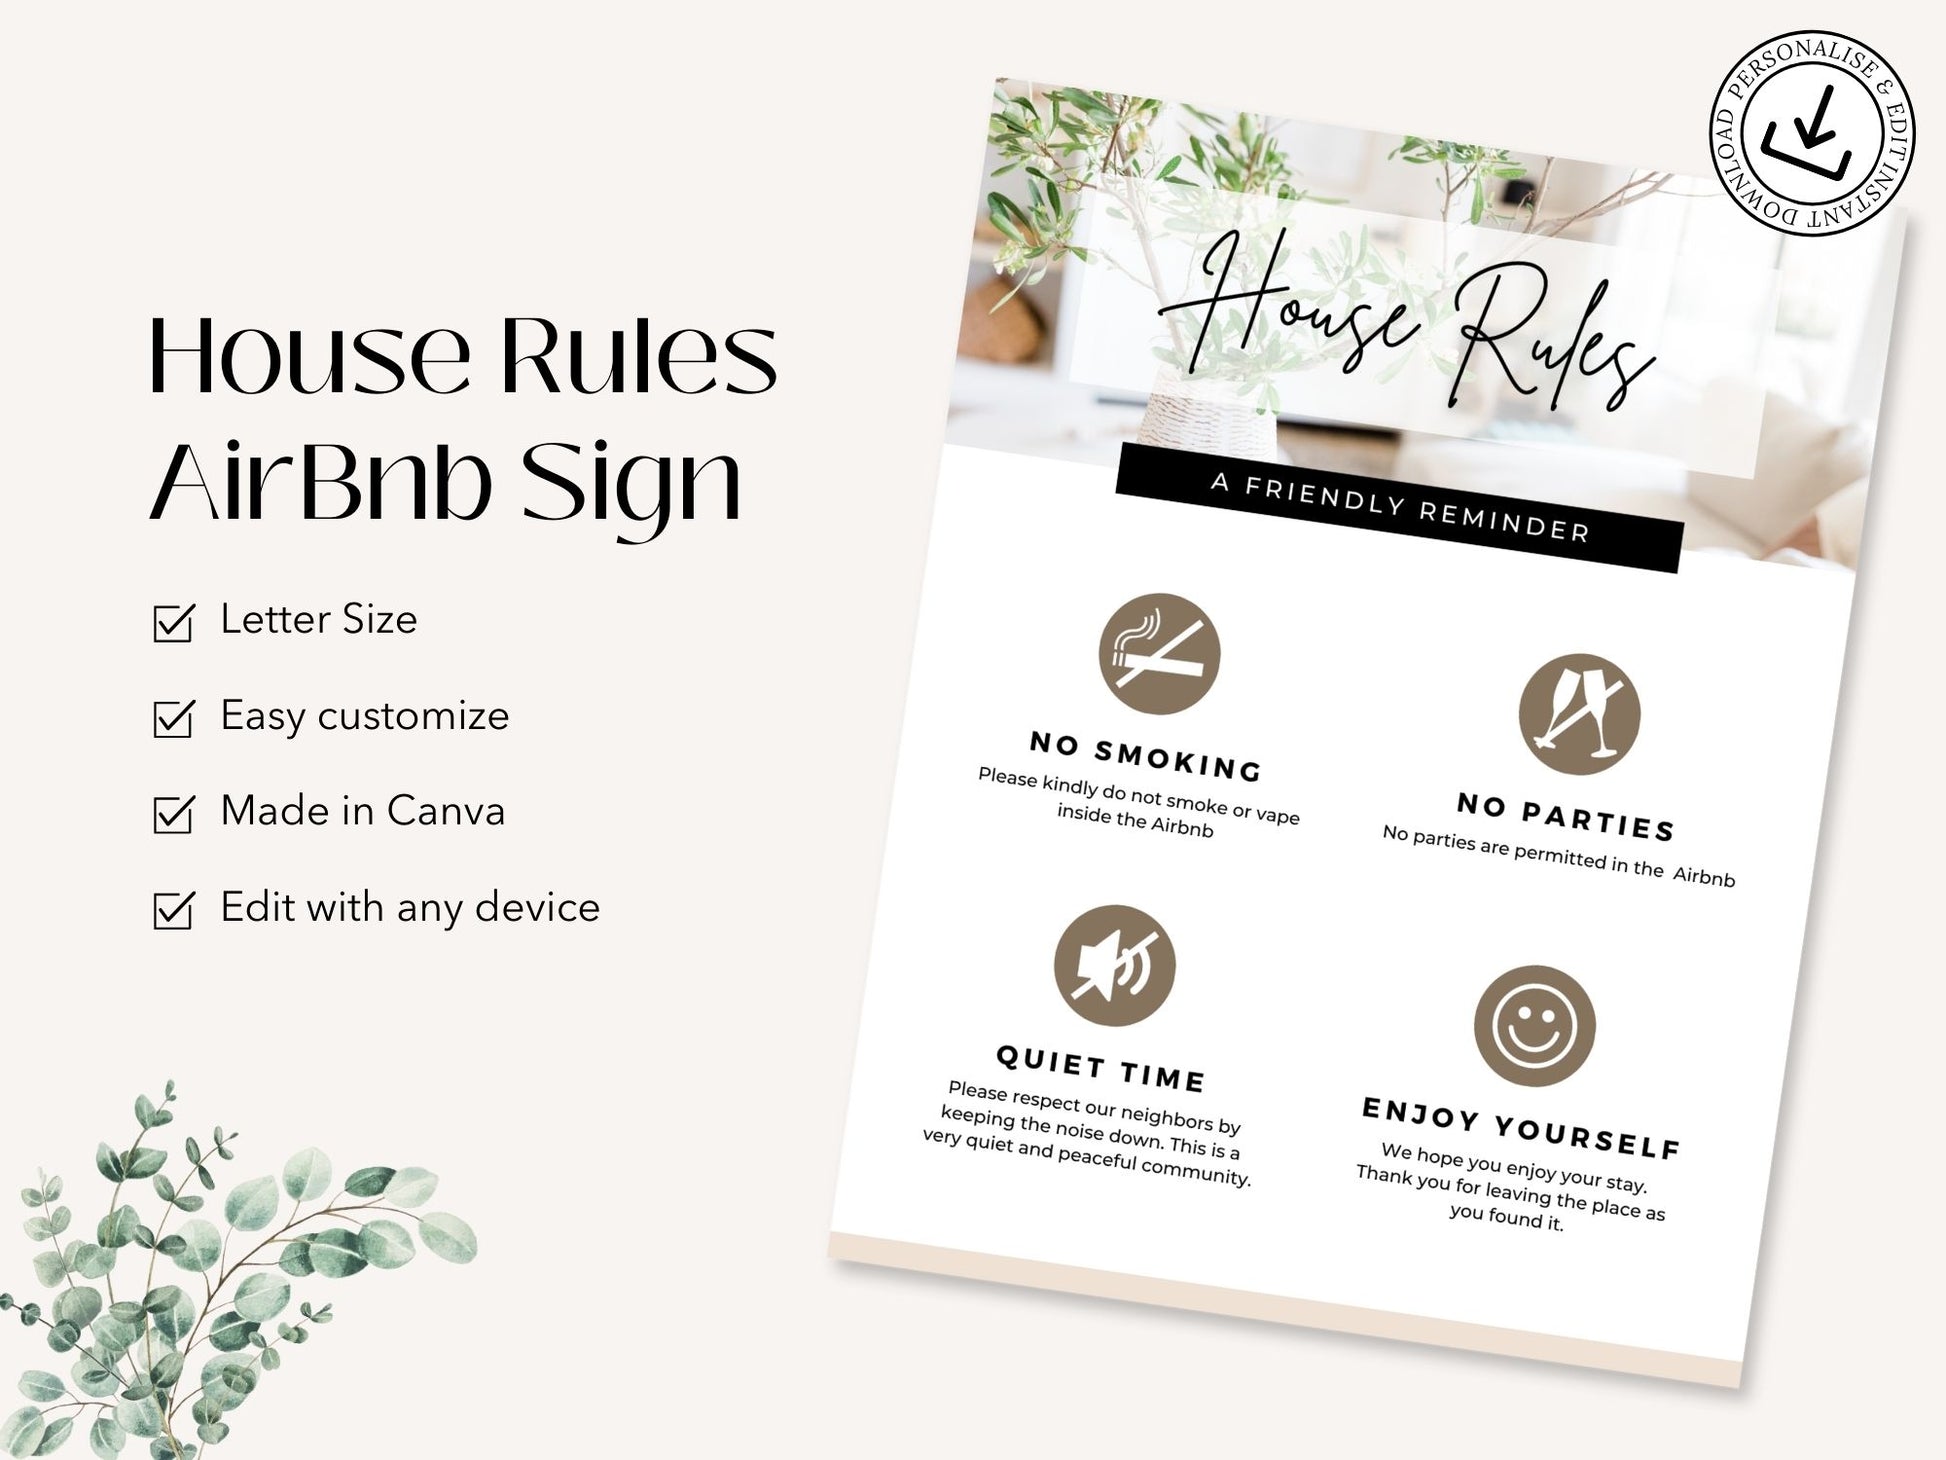 House Rules Airbnb Sign - Clear and concise template for vacation rental house guidelines.